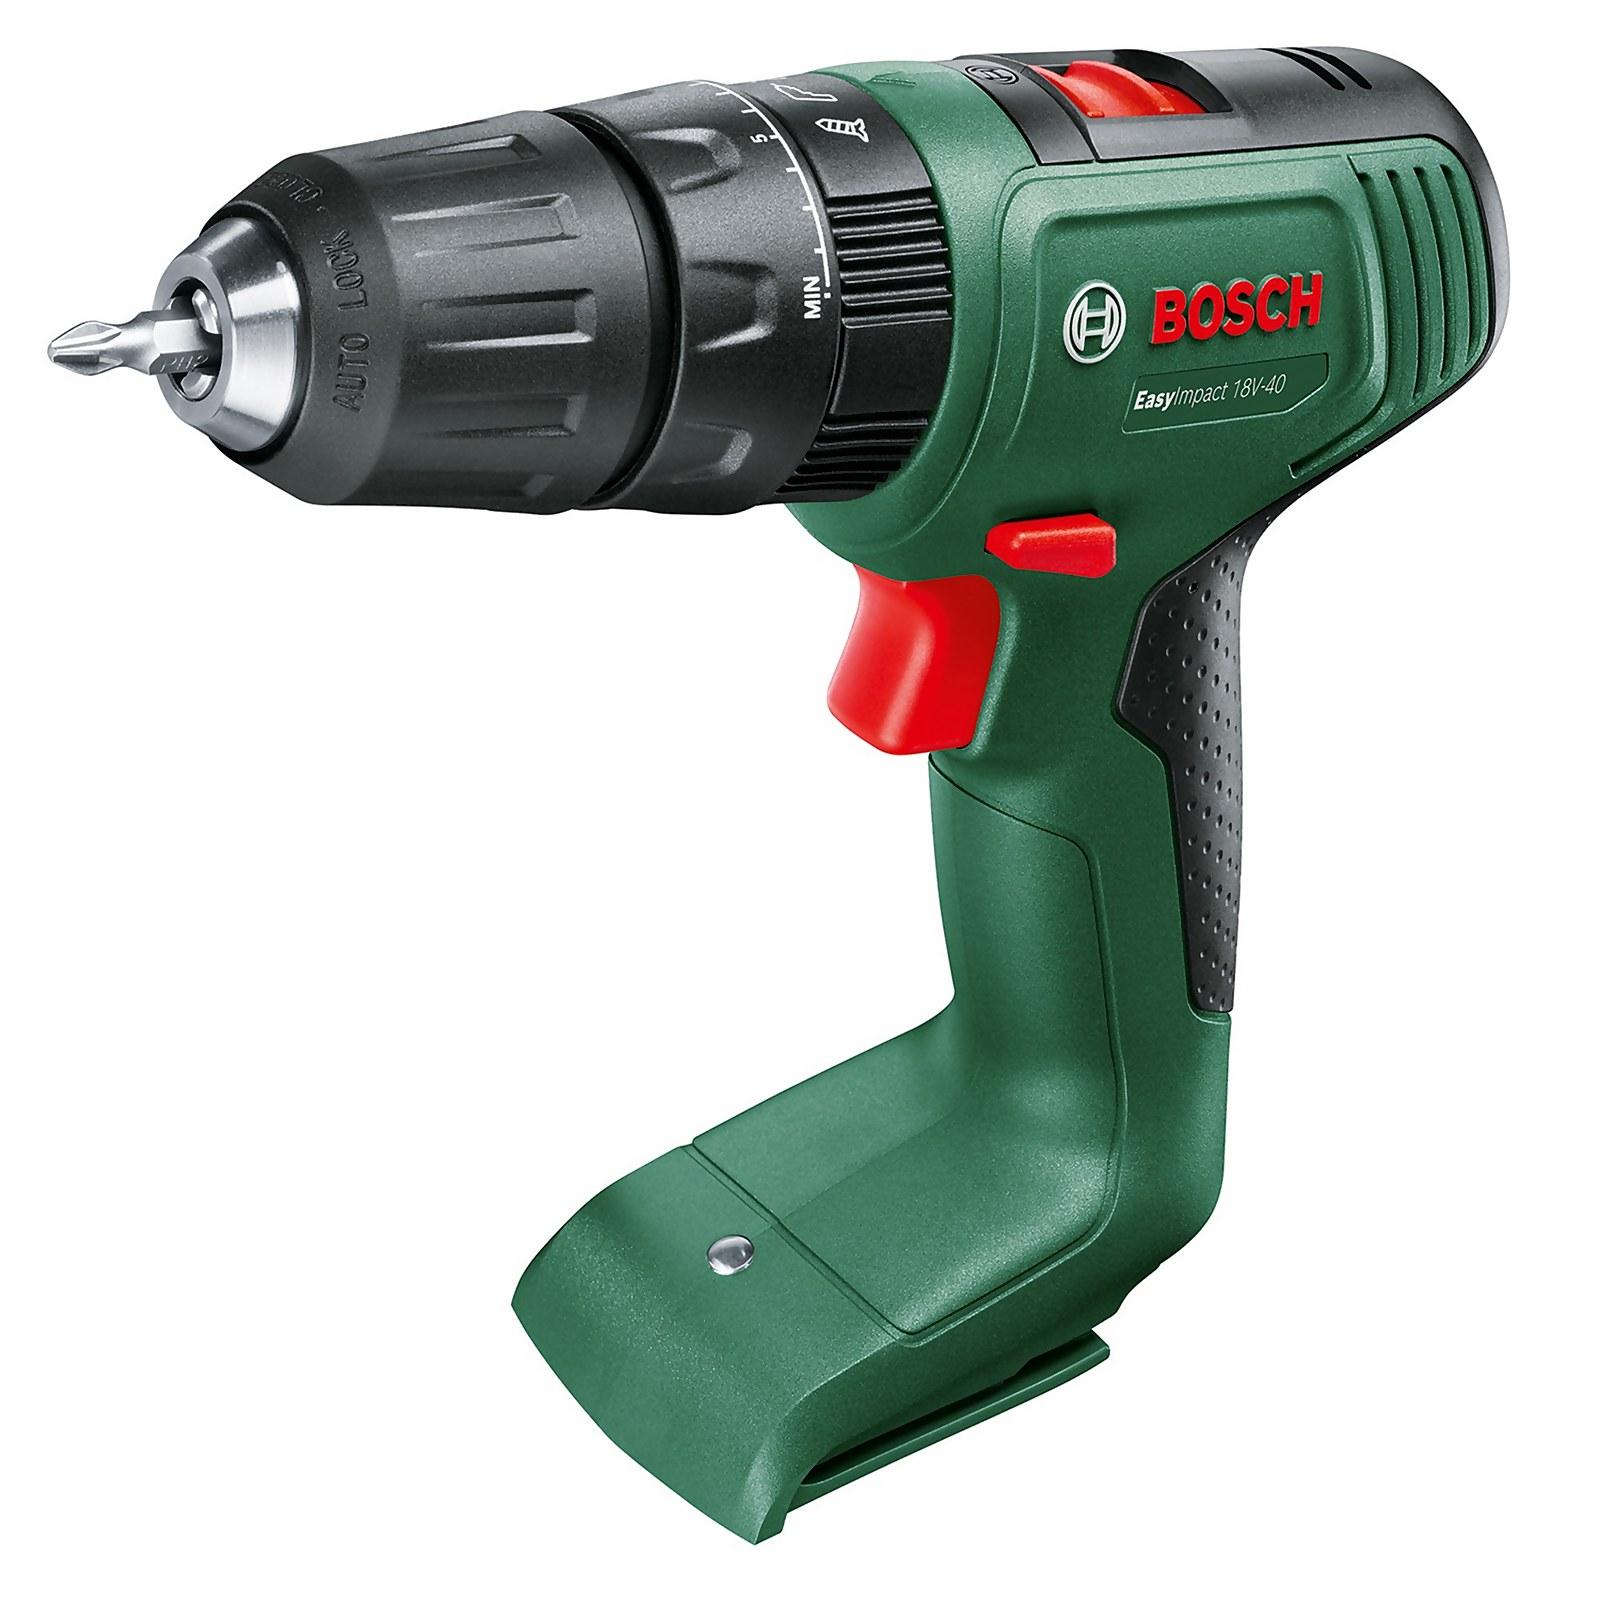 Photo of Bosch Easyimpact 18v-40 Combi Drill -no Battery Included-